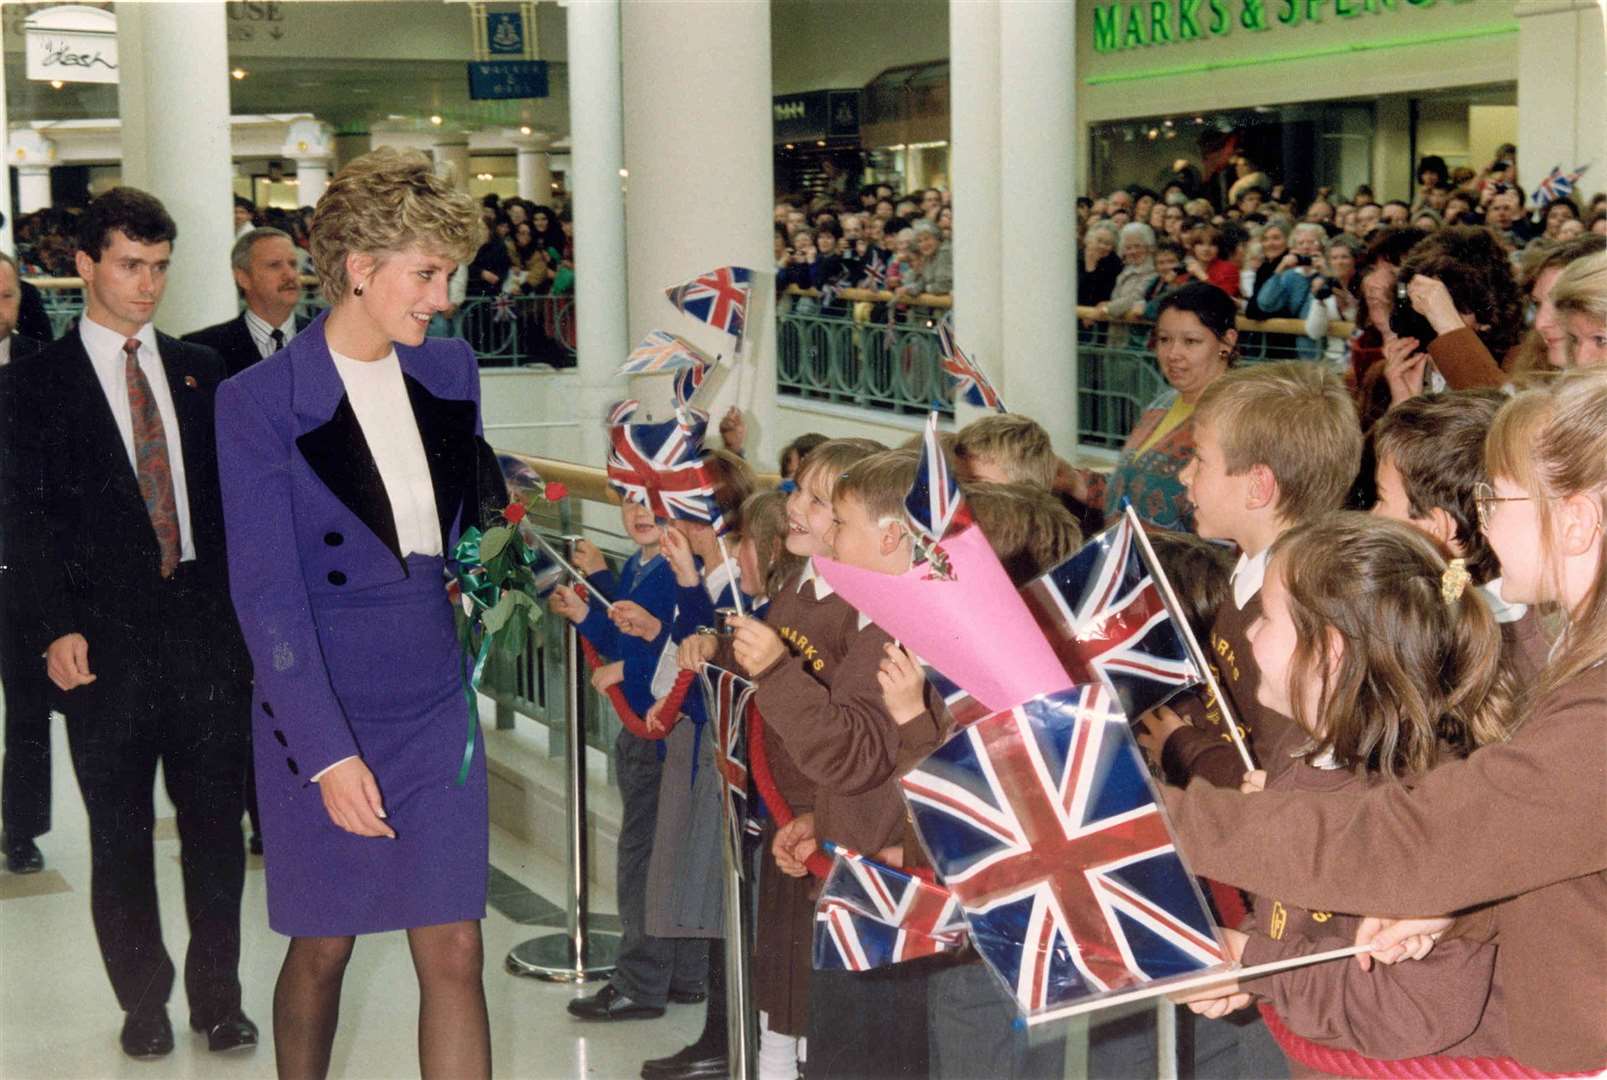 In October 1992, thousands of well-wishers lined the streets and packed into the Royal Victoria Place shopping centre in Tunbridge Wells to catch a glimpse of Princess Diana who unveiled a plaque to mark the opening of the £100m development